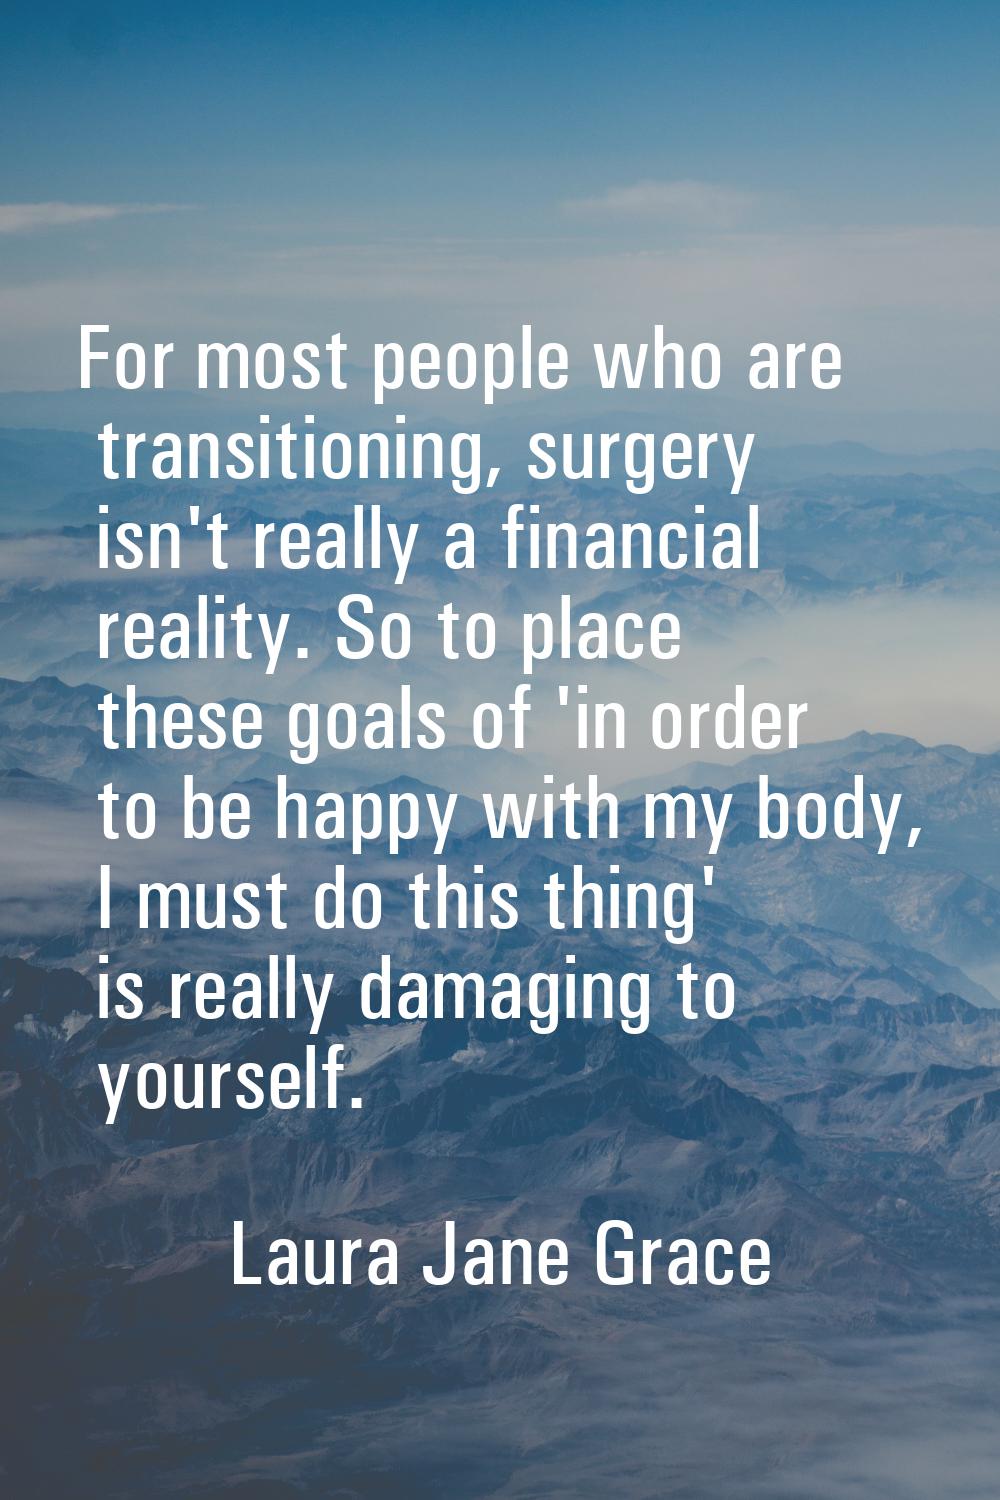 For most people who are transitioning, surgery isn't really a financial reality. So to place these 